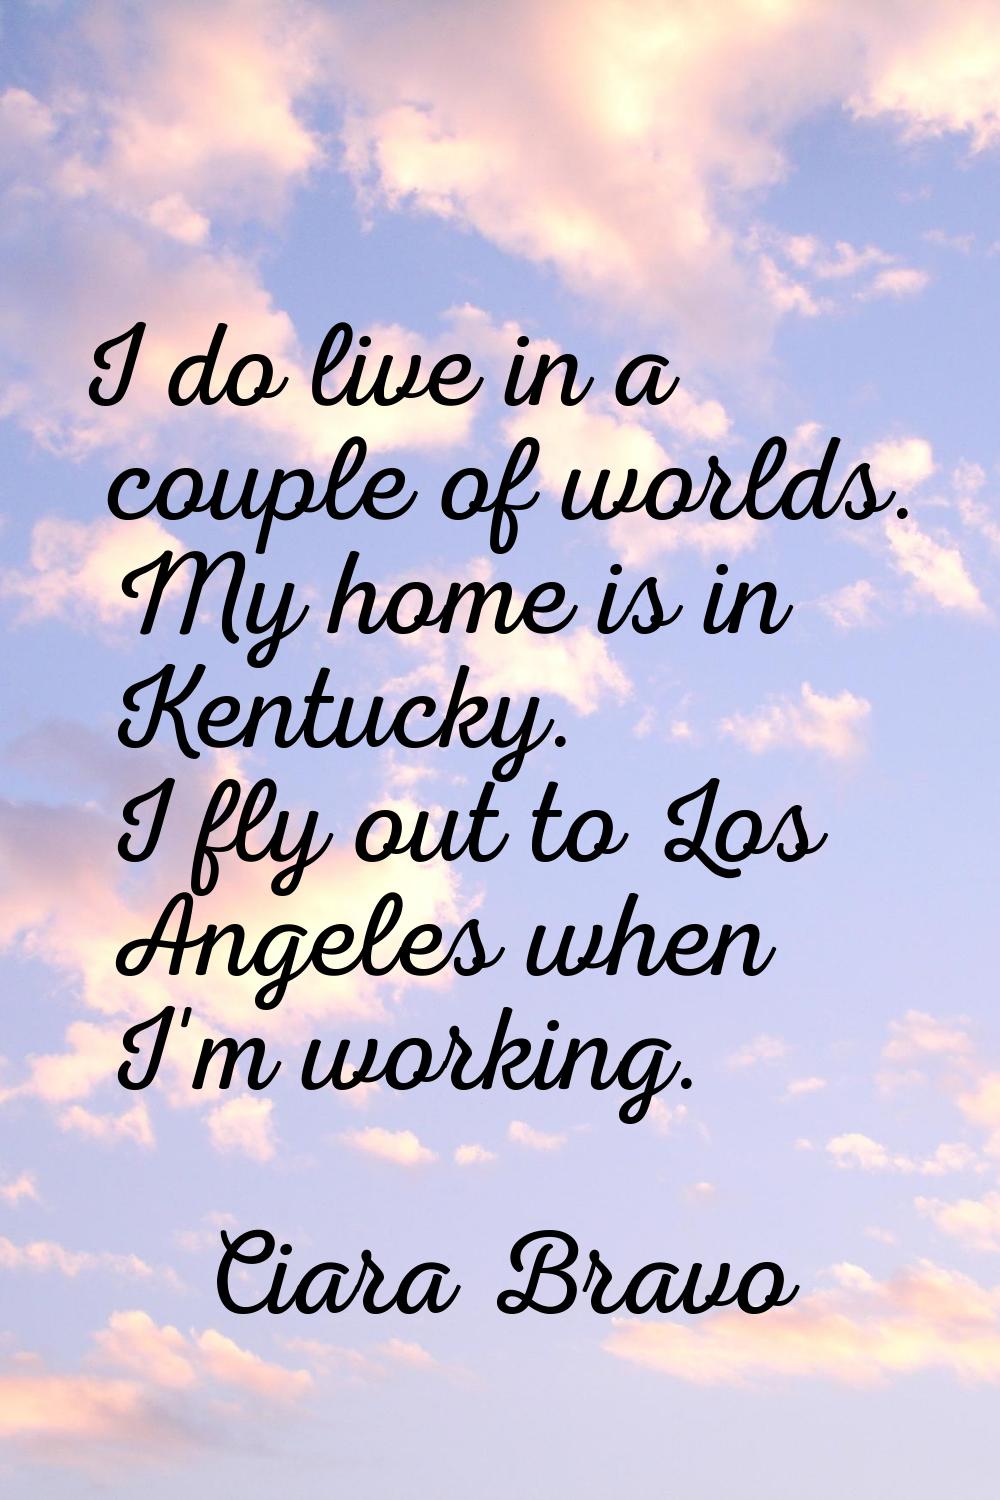 I do live in a couple of worlds. My home is in Kentucky. I fly out to Los Angeles when I'm working.